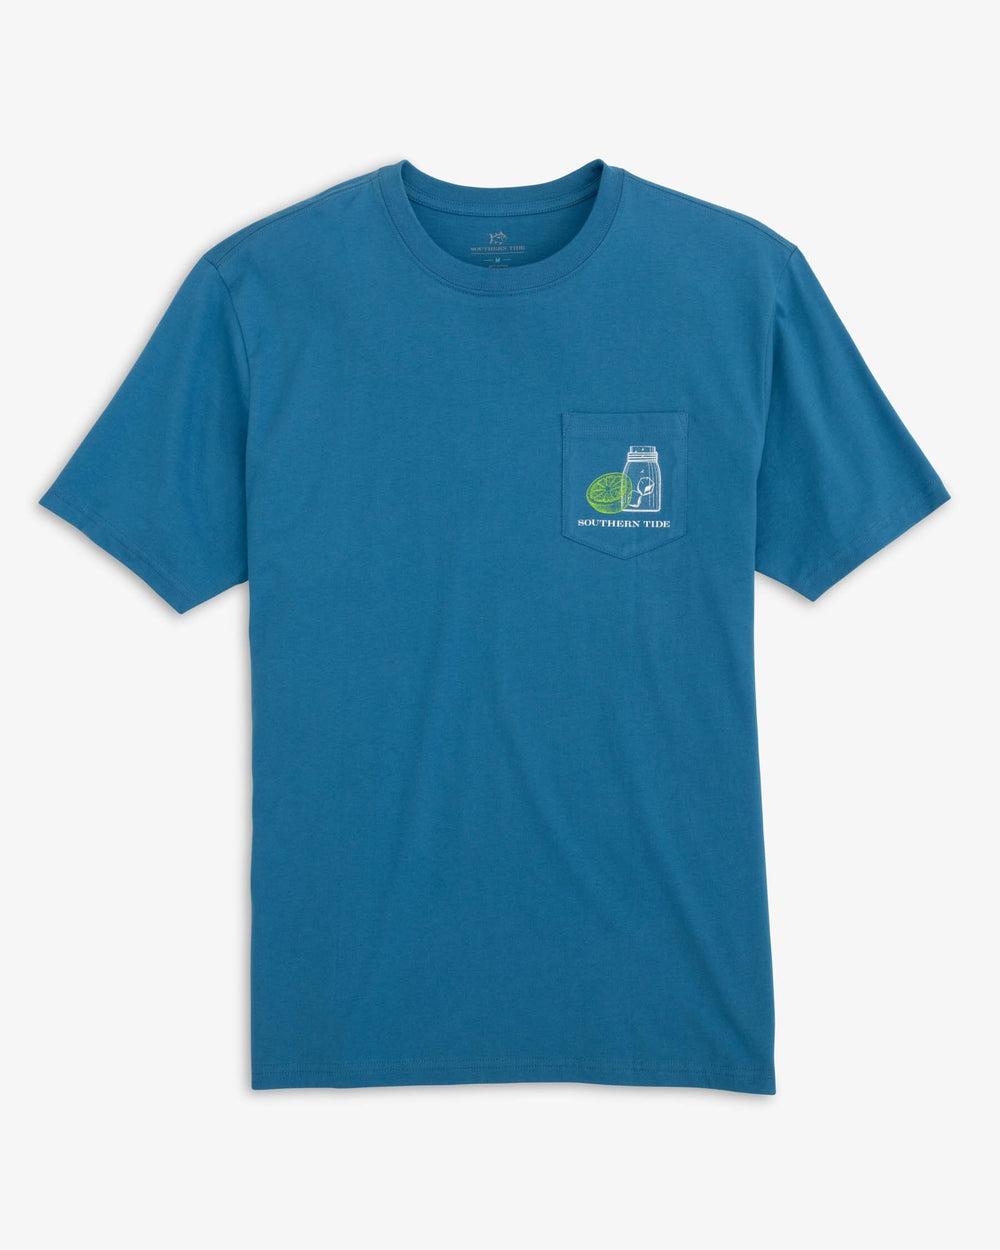 The front view of the Southern Tide Tap Schematic T-Shirt by Southern Tide - Atlantic Blue